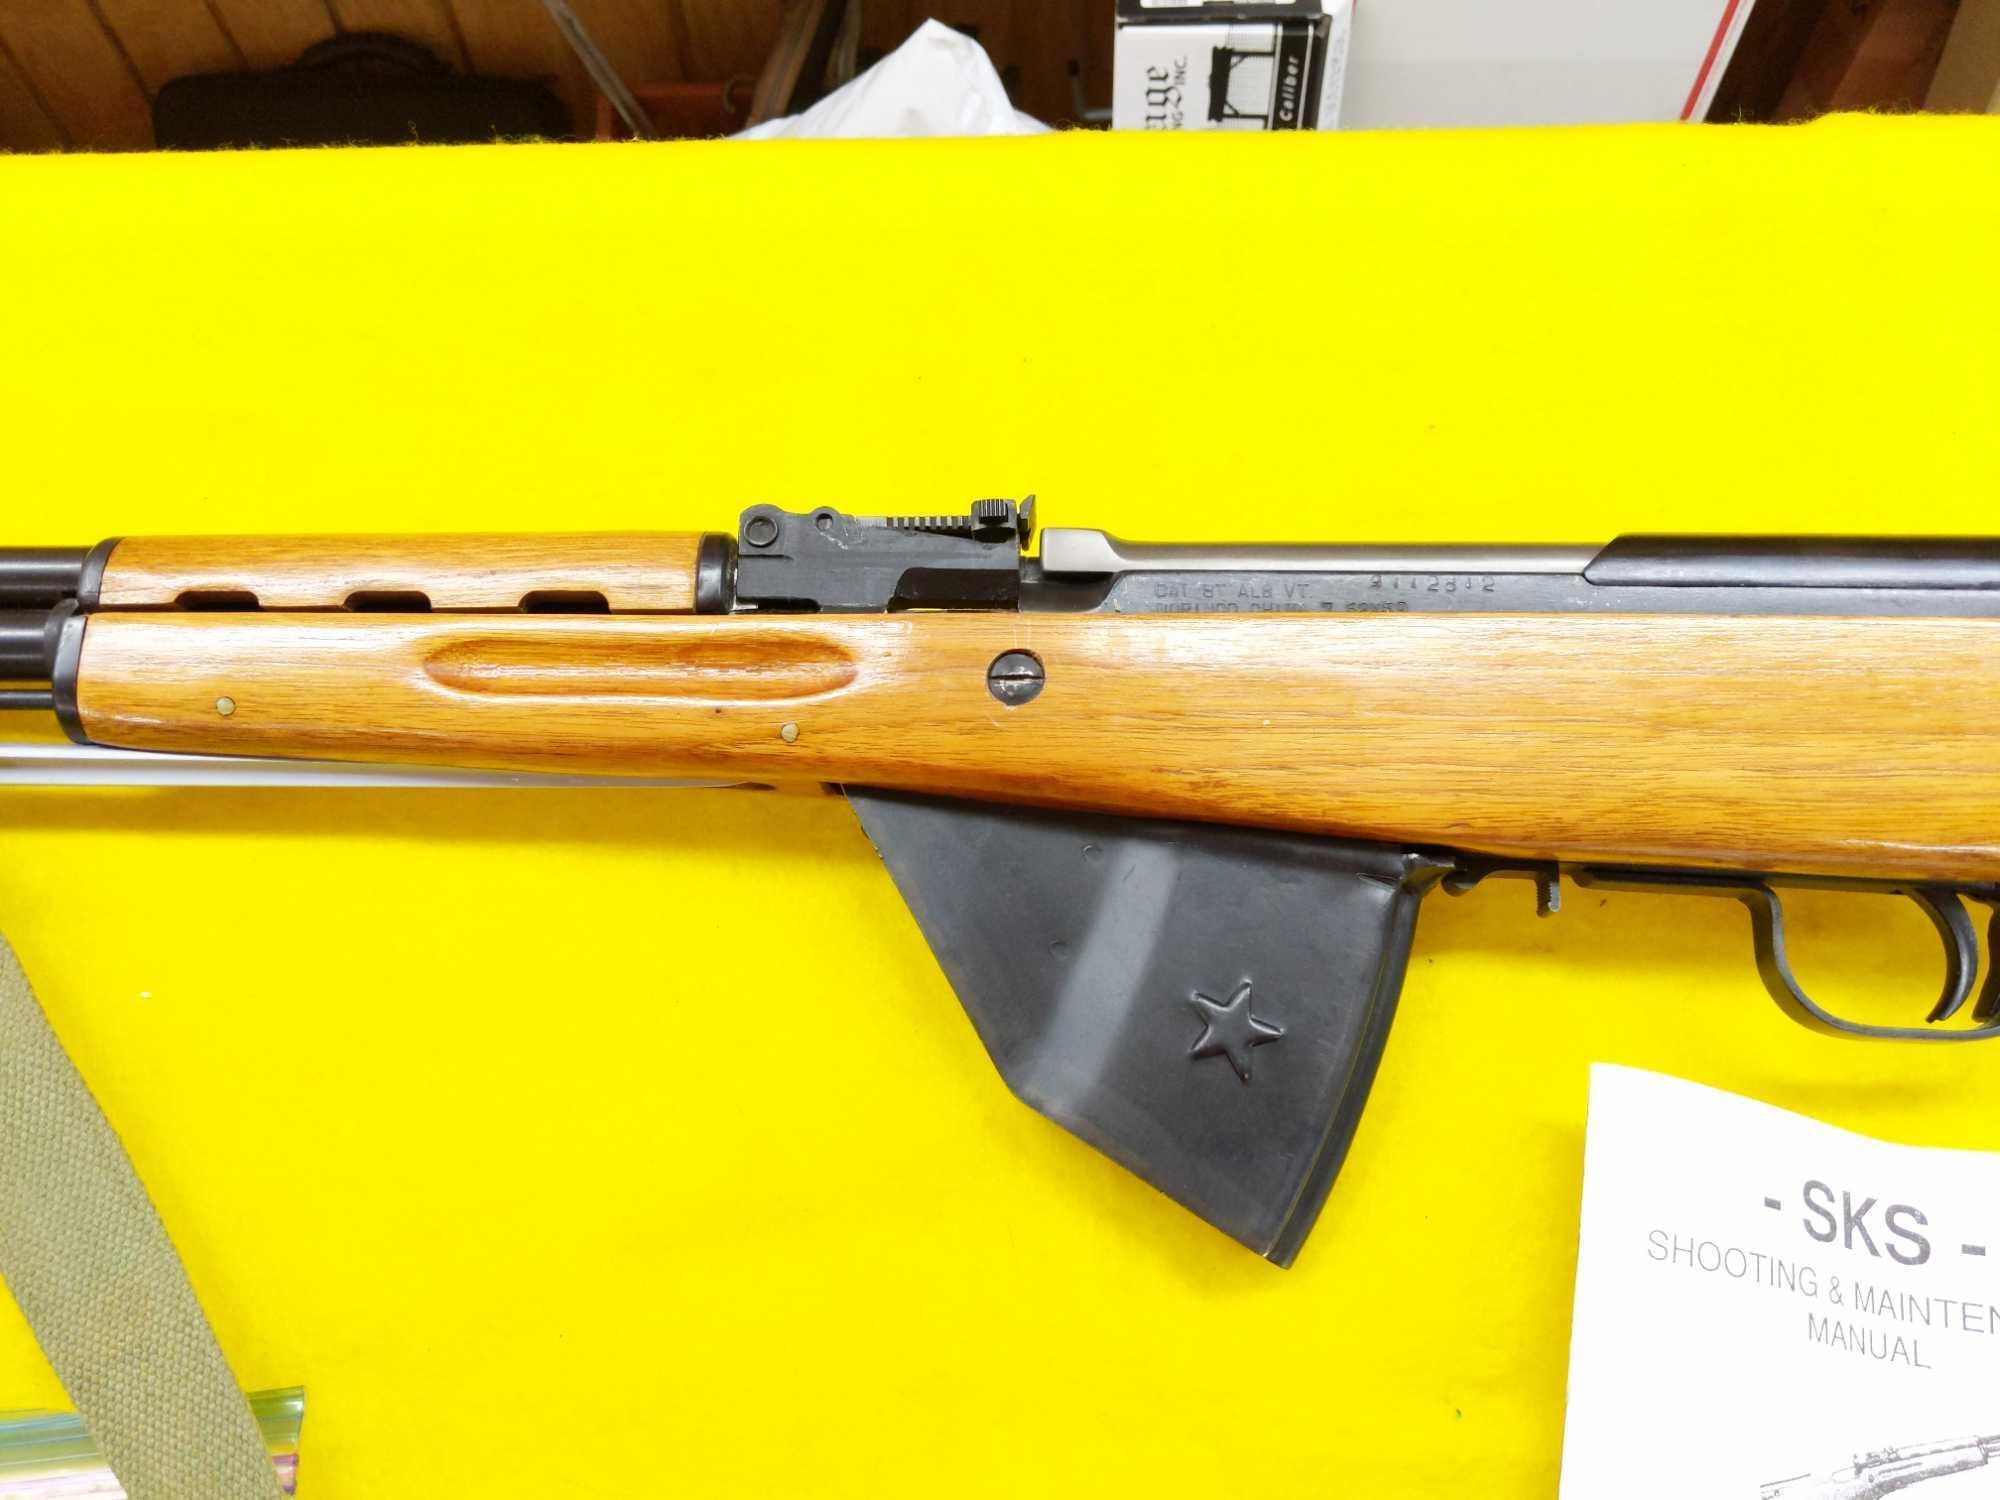 Chinese SKS Rifle with Bayonet 762X39 Caliber Model 56 SN-9112812 All Matching